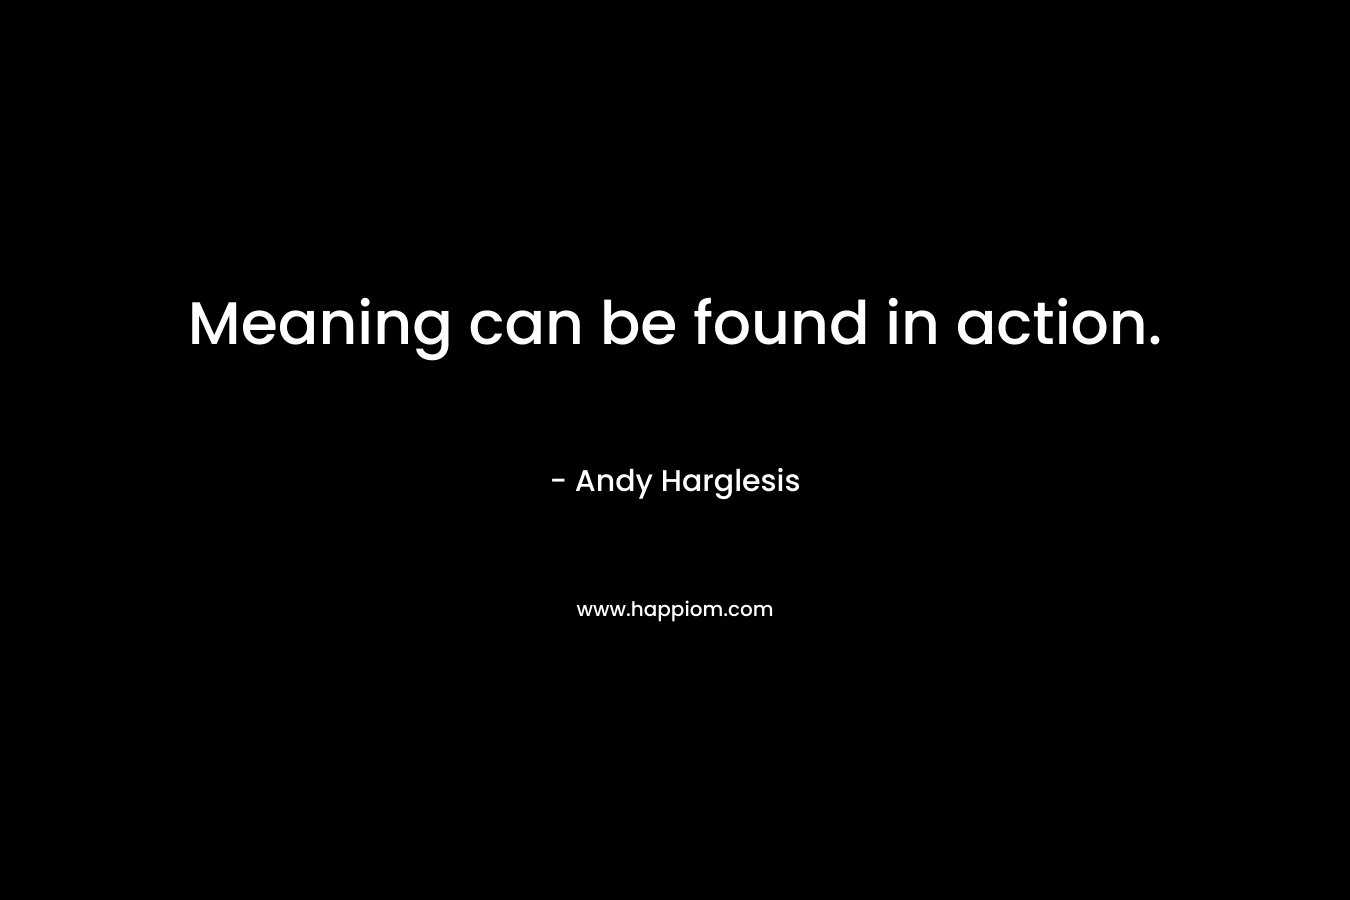 Meaning can be found in action.